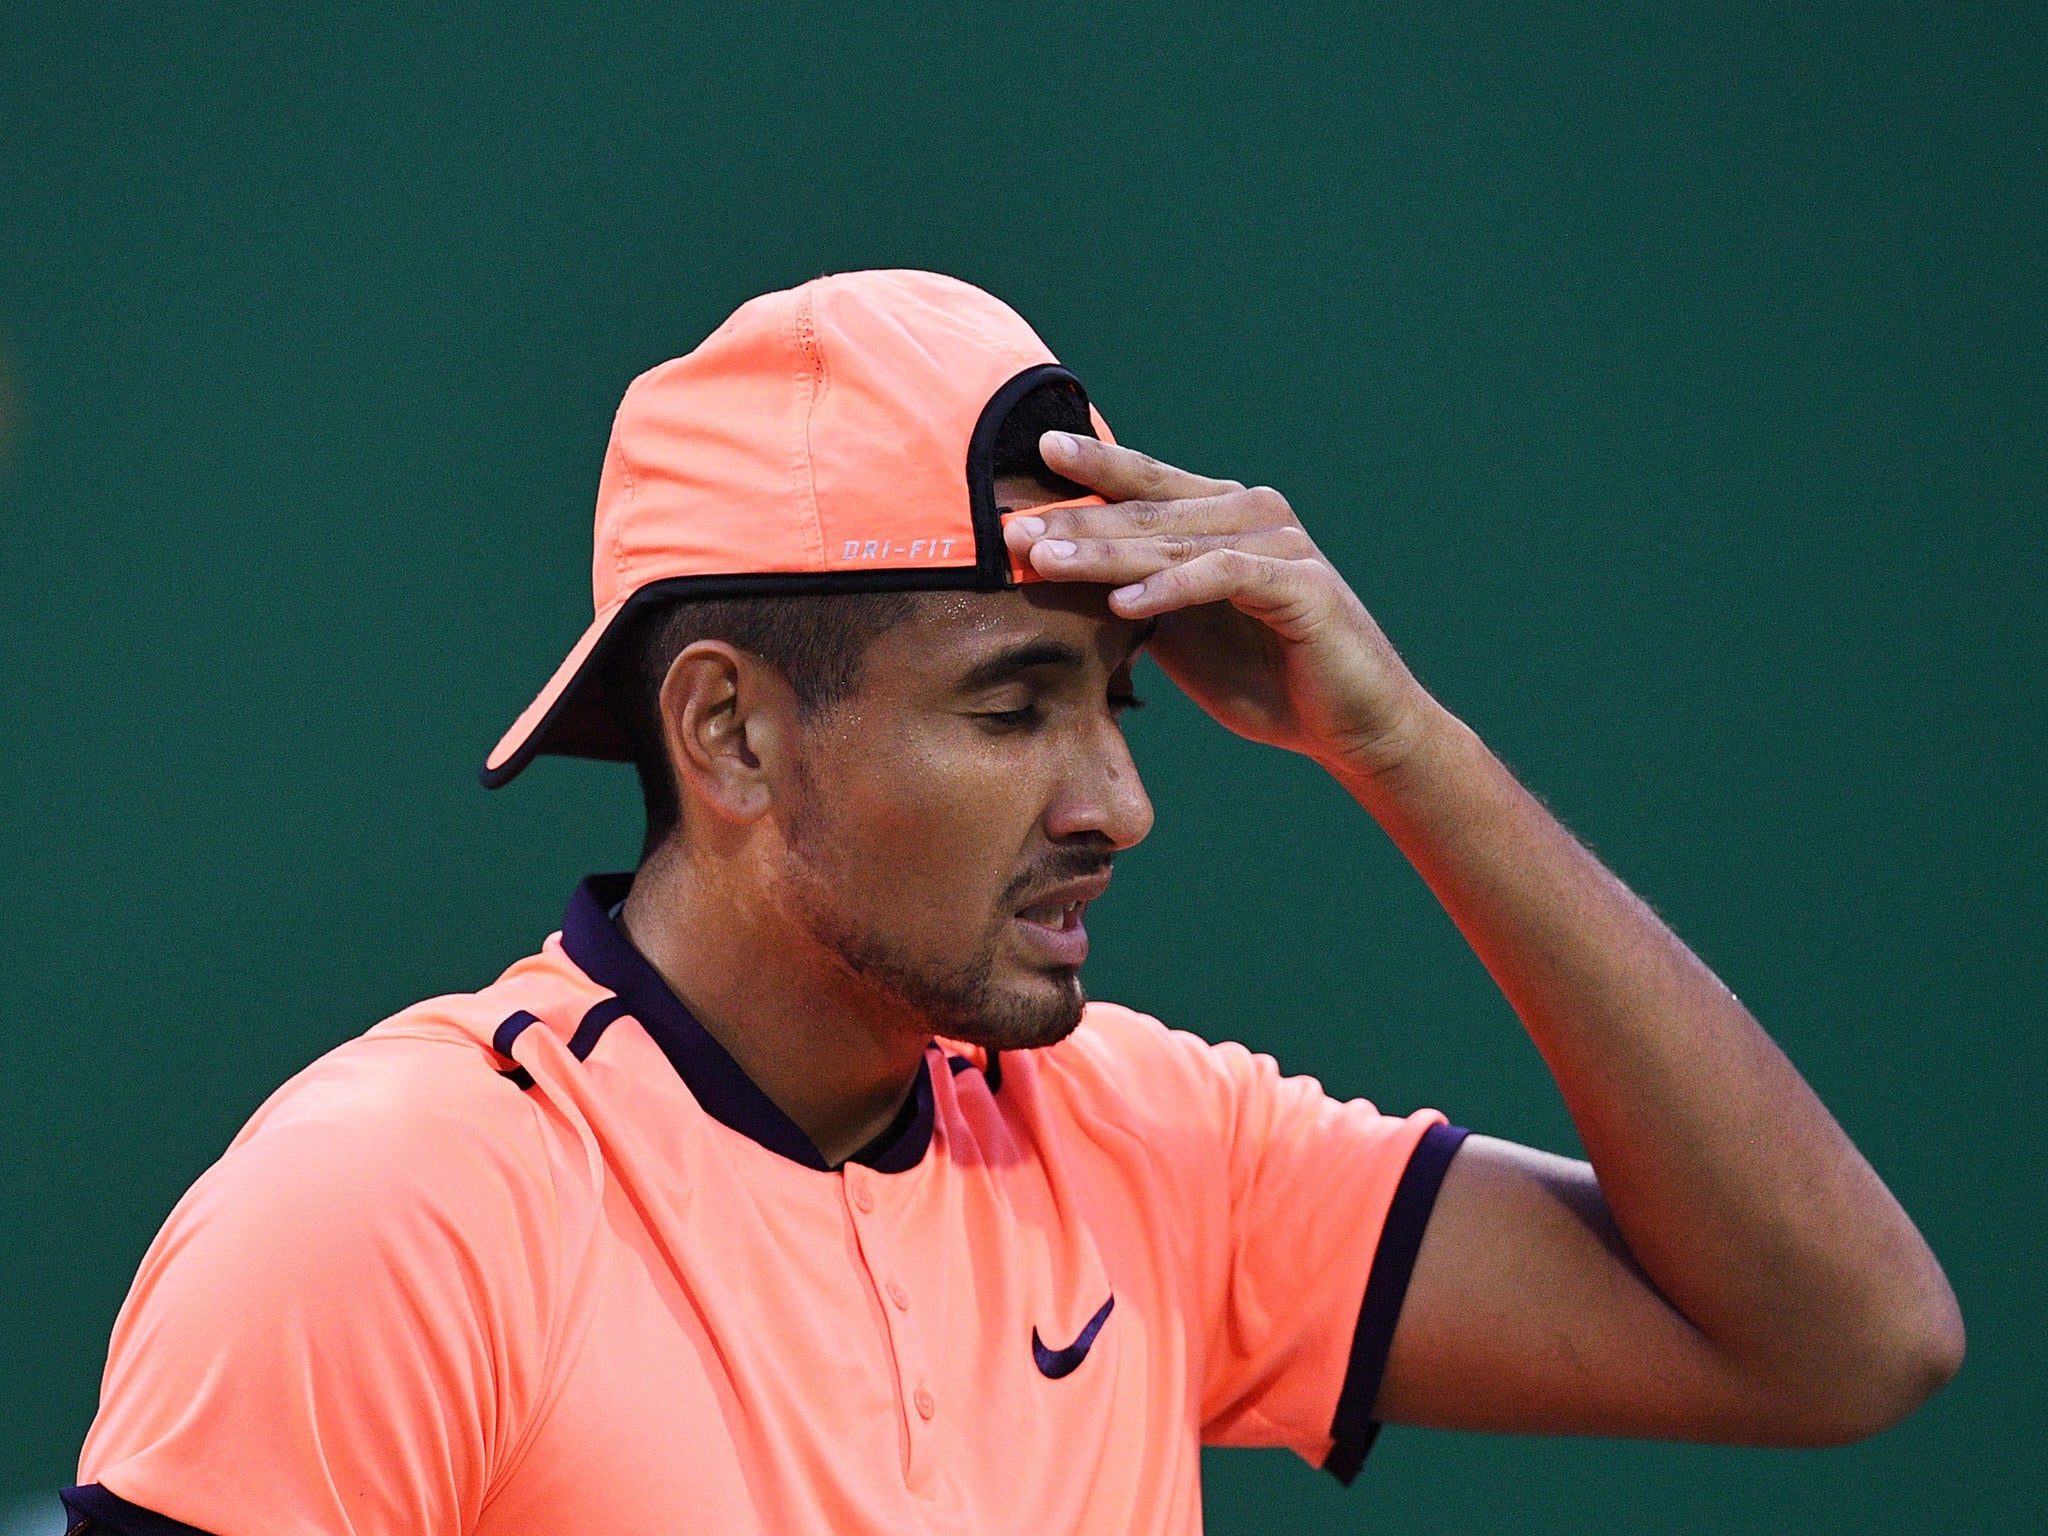 Nick Kyrgios caused controversy after appearing in an anti-Donald Trump T-shirt